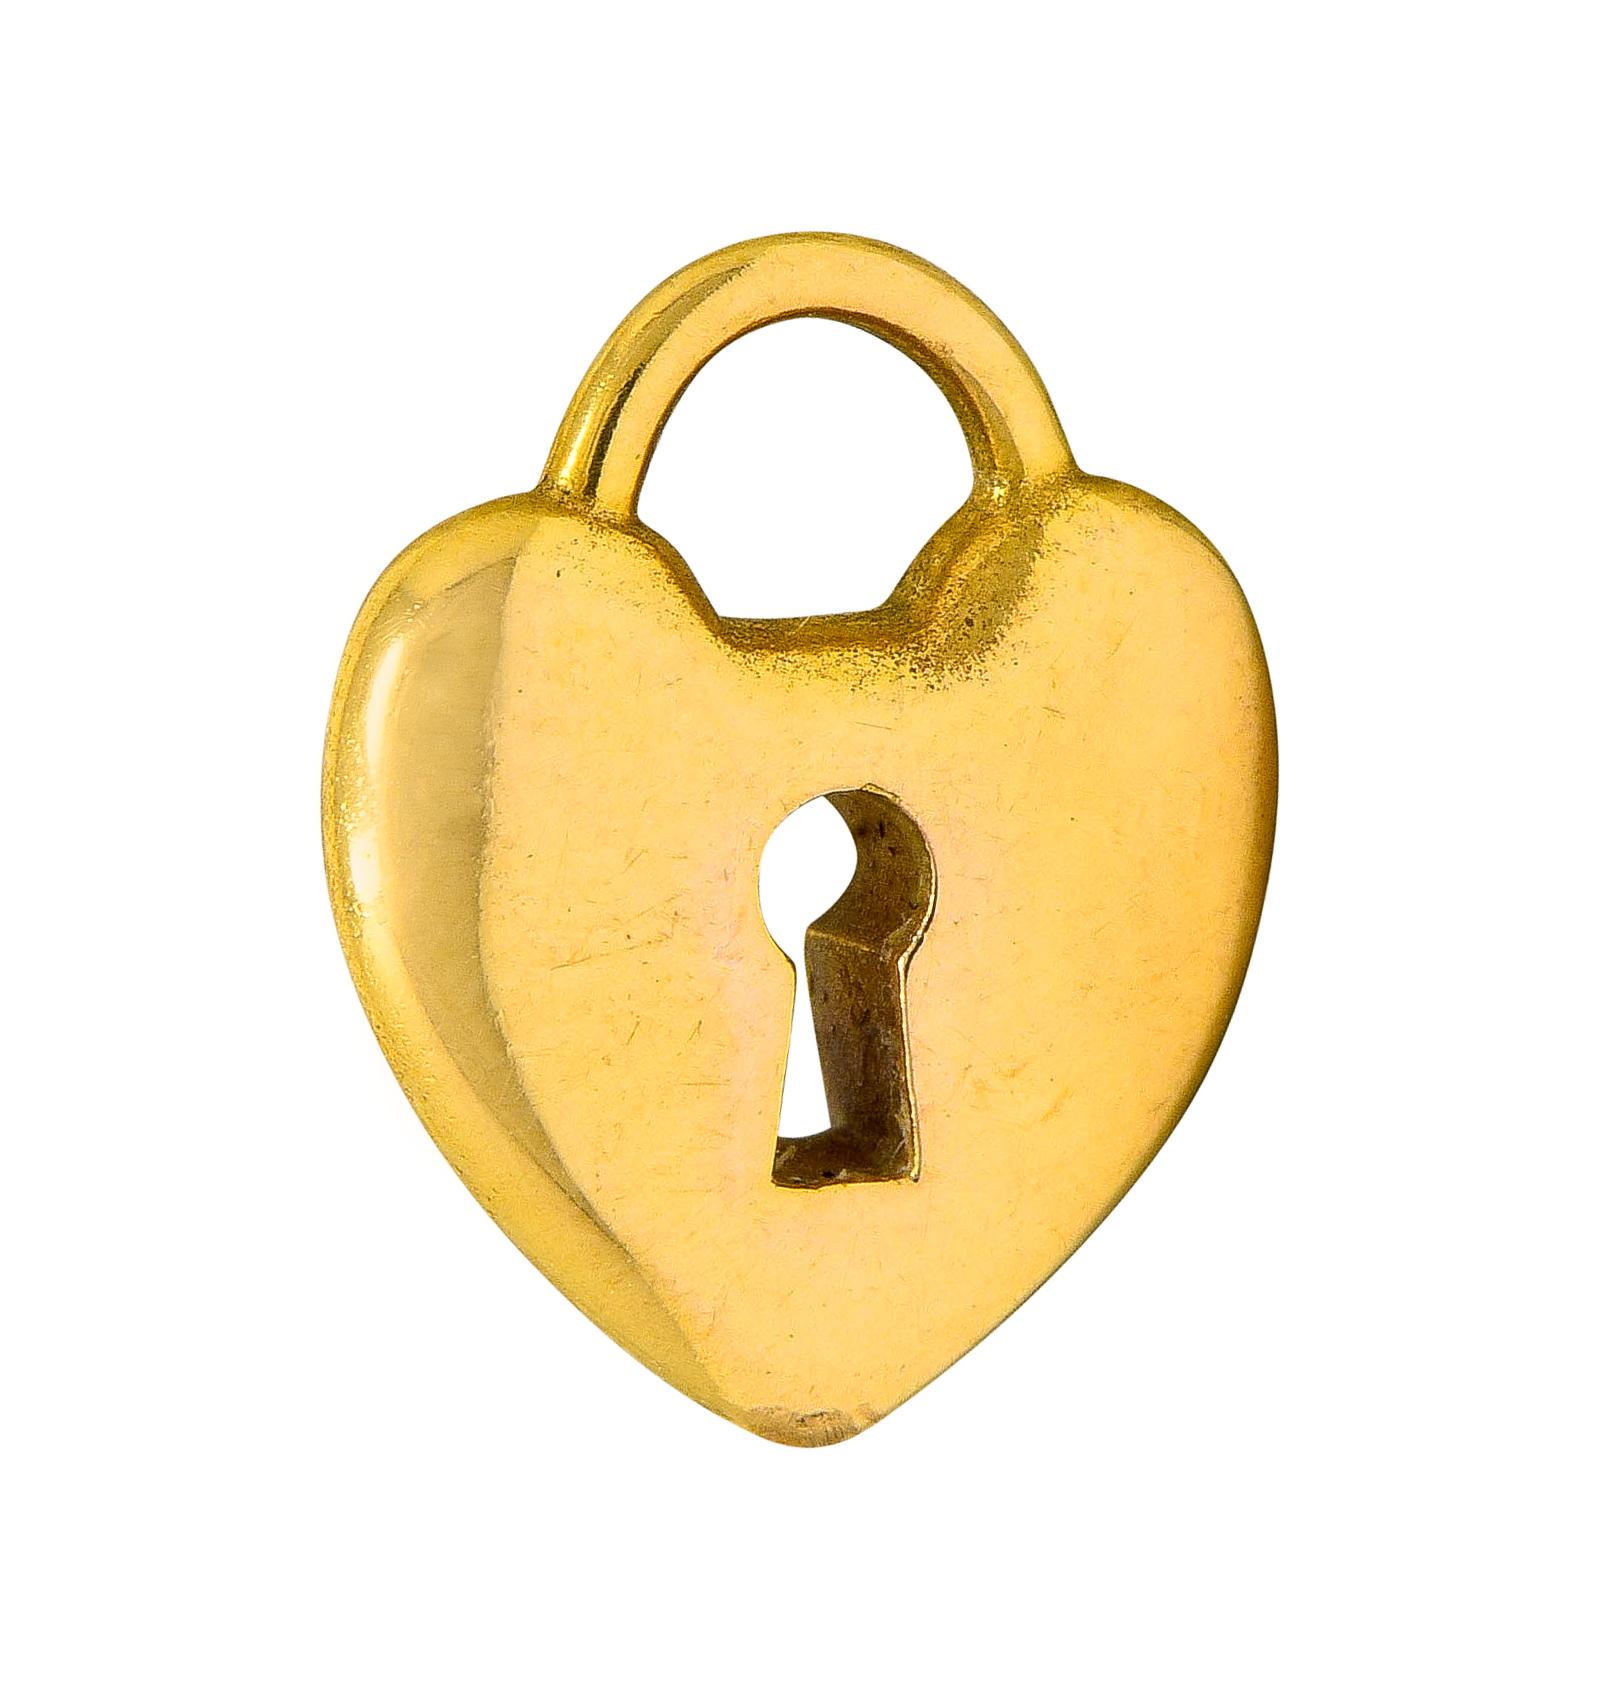 Charm is designed as a heart shaped padlock

With a pierced stylized keyhole center

Signed T & Co. and stamped 750 for 18 karat gold

From the Tiffany Hearts collection

Circa: 2000s

Measures: 3/8 x 7/16 inch

Total weight: 1.7 grams

Dainty. Key